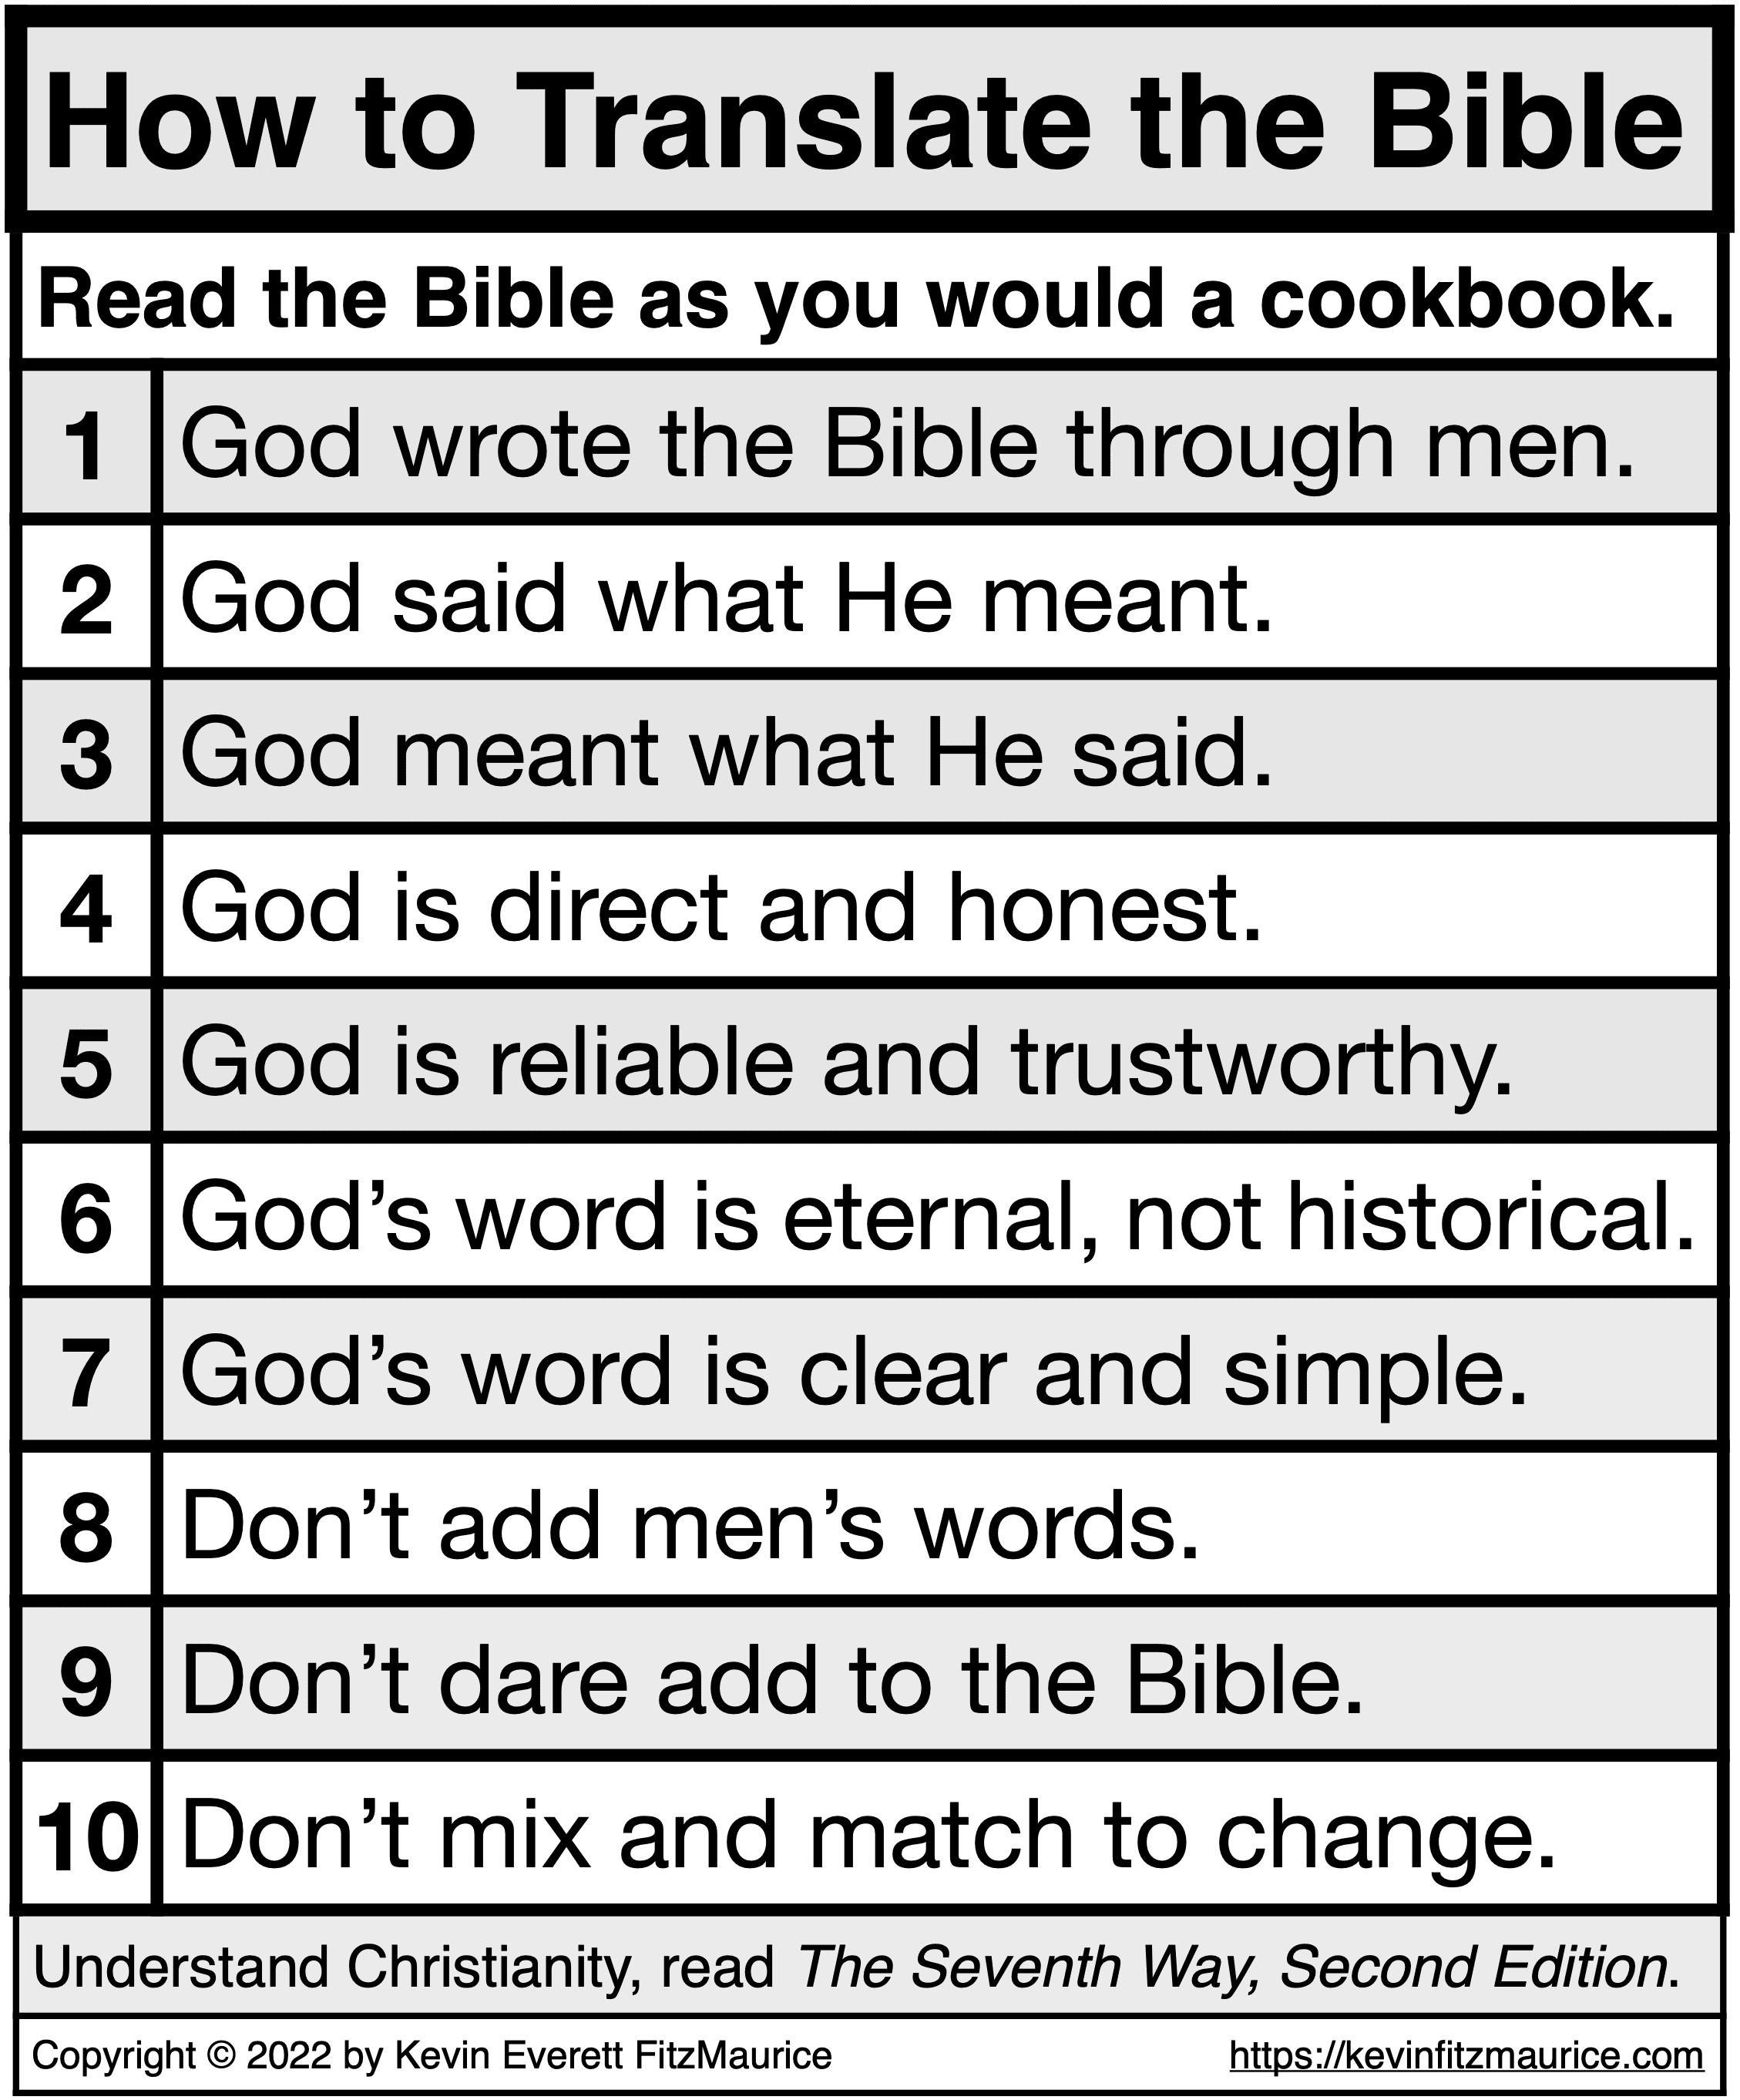 How to Translate the Bible